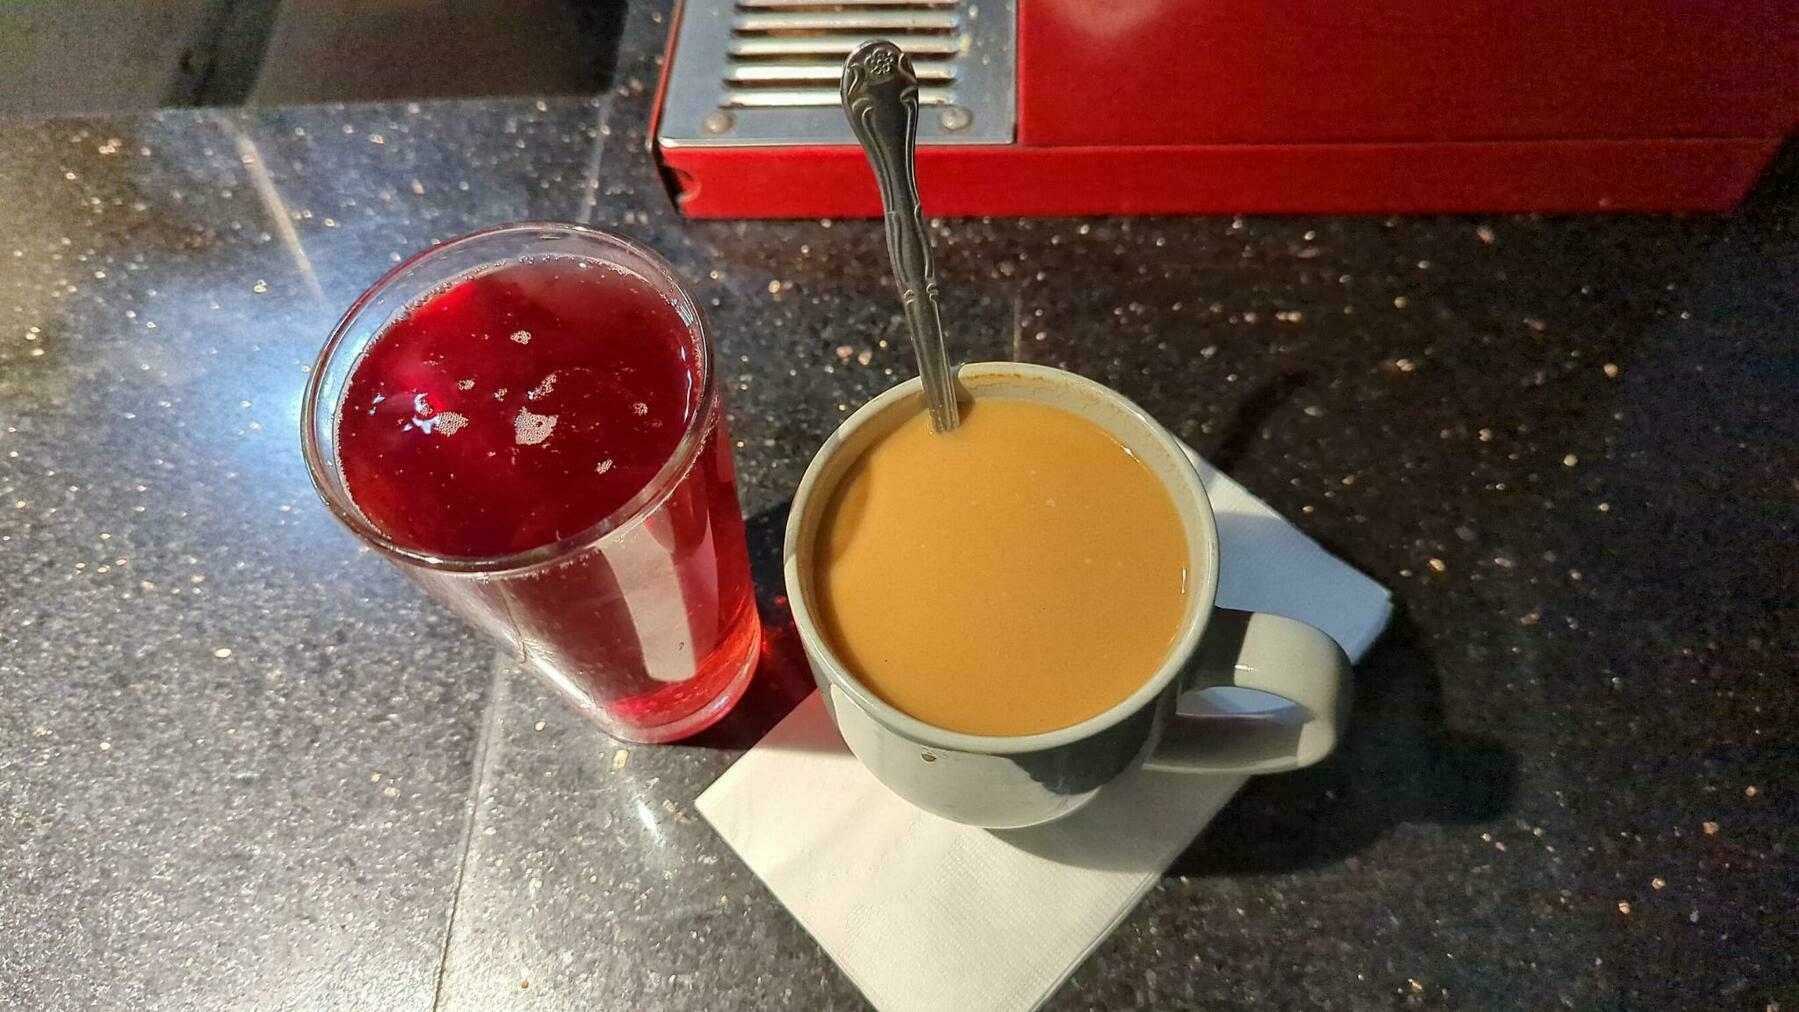 A wide white mug full of coffee with cream and sugar and a spoon sticking out of the top, next to a pint glass full of blackberry kombucha atop a dark marble countertop next to a bright red coffee grinder Sunday, March 26, 2023 at Rooz Cafe in the 1900 block of Park Boulevard in Oakland, California.